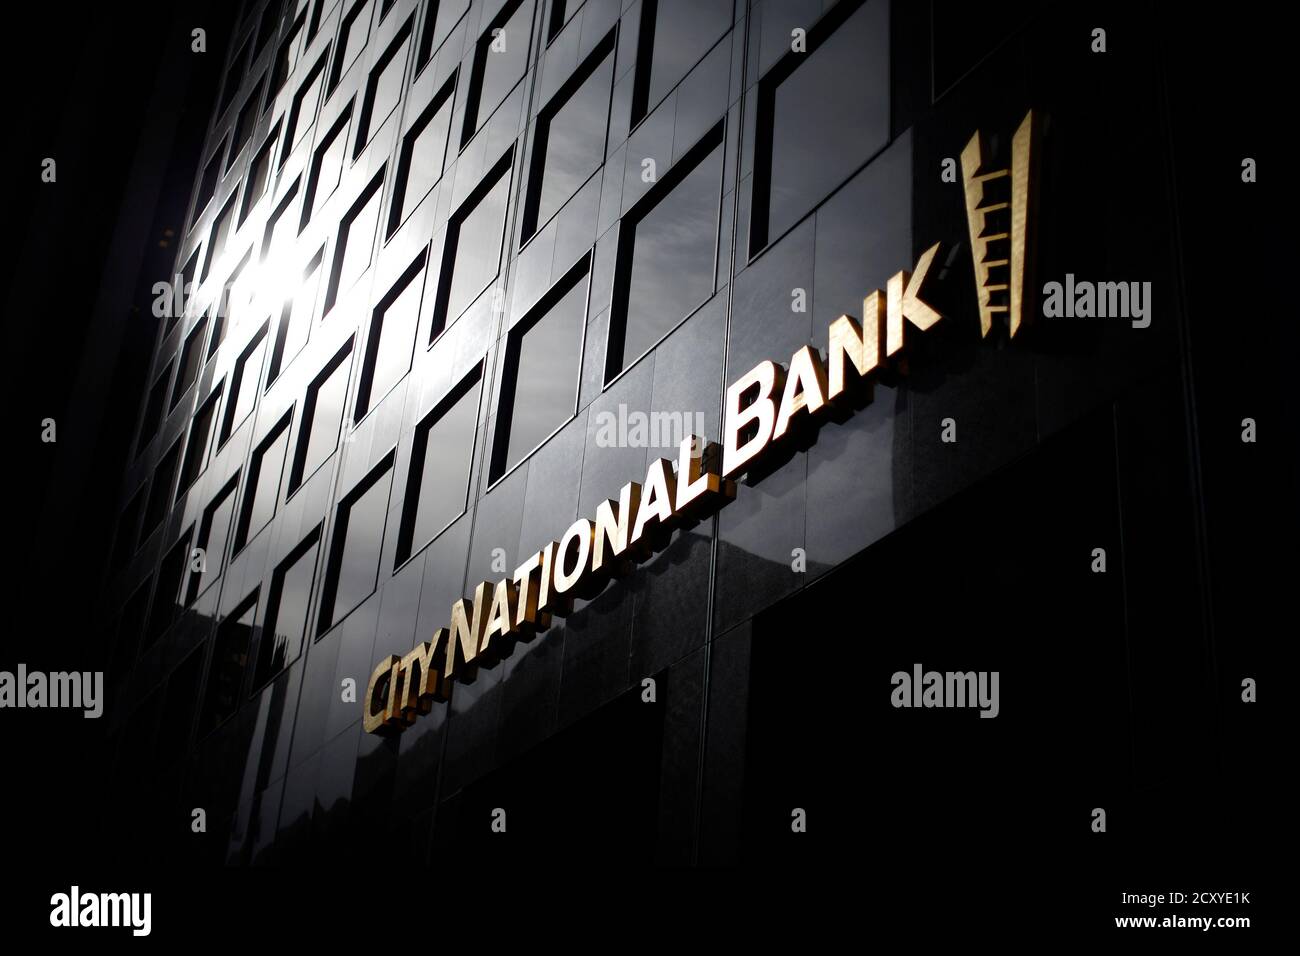 A City National Bank office is seen in downtown Los Angeles, California January 22, 2015. Royal Bank of Canada is pushing deeper into the U.S. wealth management business, saying on Thursday it will buy Los Angeles-based City National Corp for $5.4 billion in a deal that targets City's stable of high-net worth clients. REUTERS/Lucy Nicholson (UNITED STATES - Tags: BUSINESS LOGO) Stock Photo